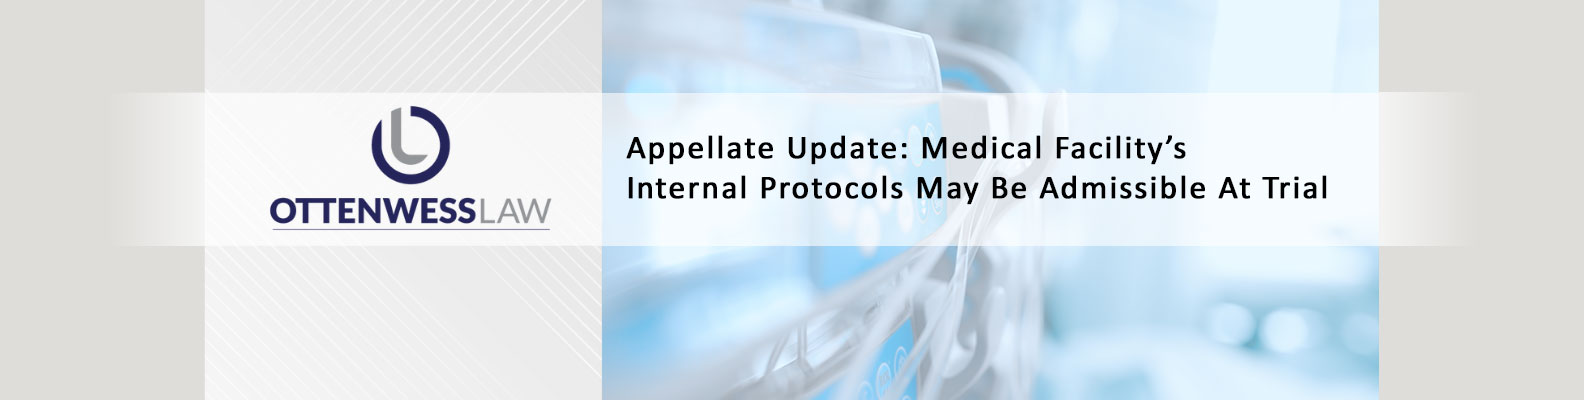 Appellate Update: Medical Facility’s Internal Protocols May Be Admissible At Trial